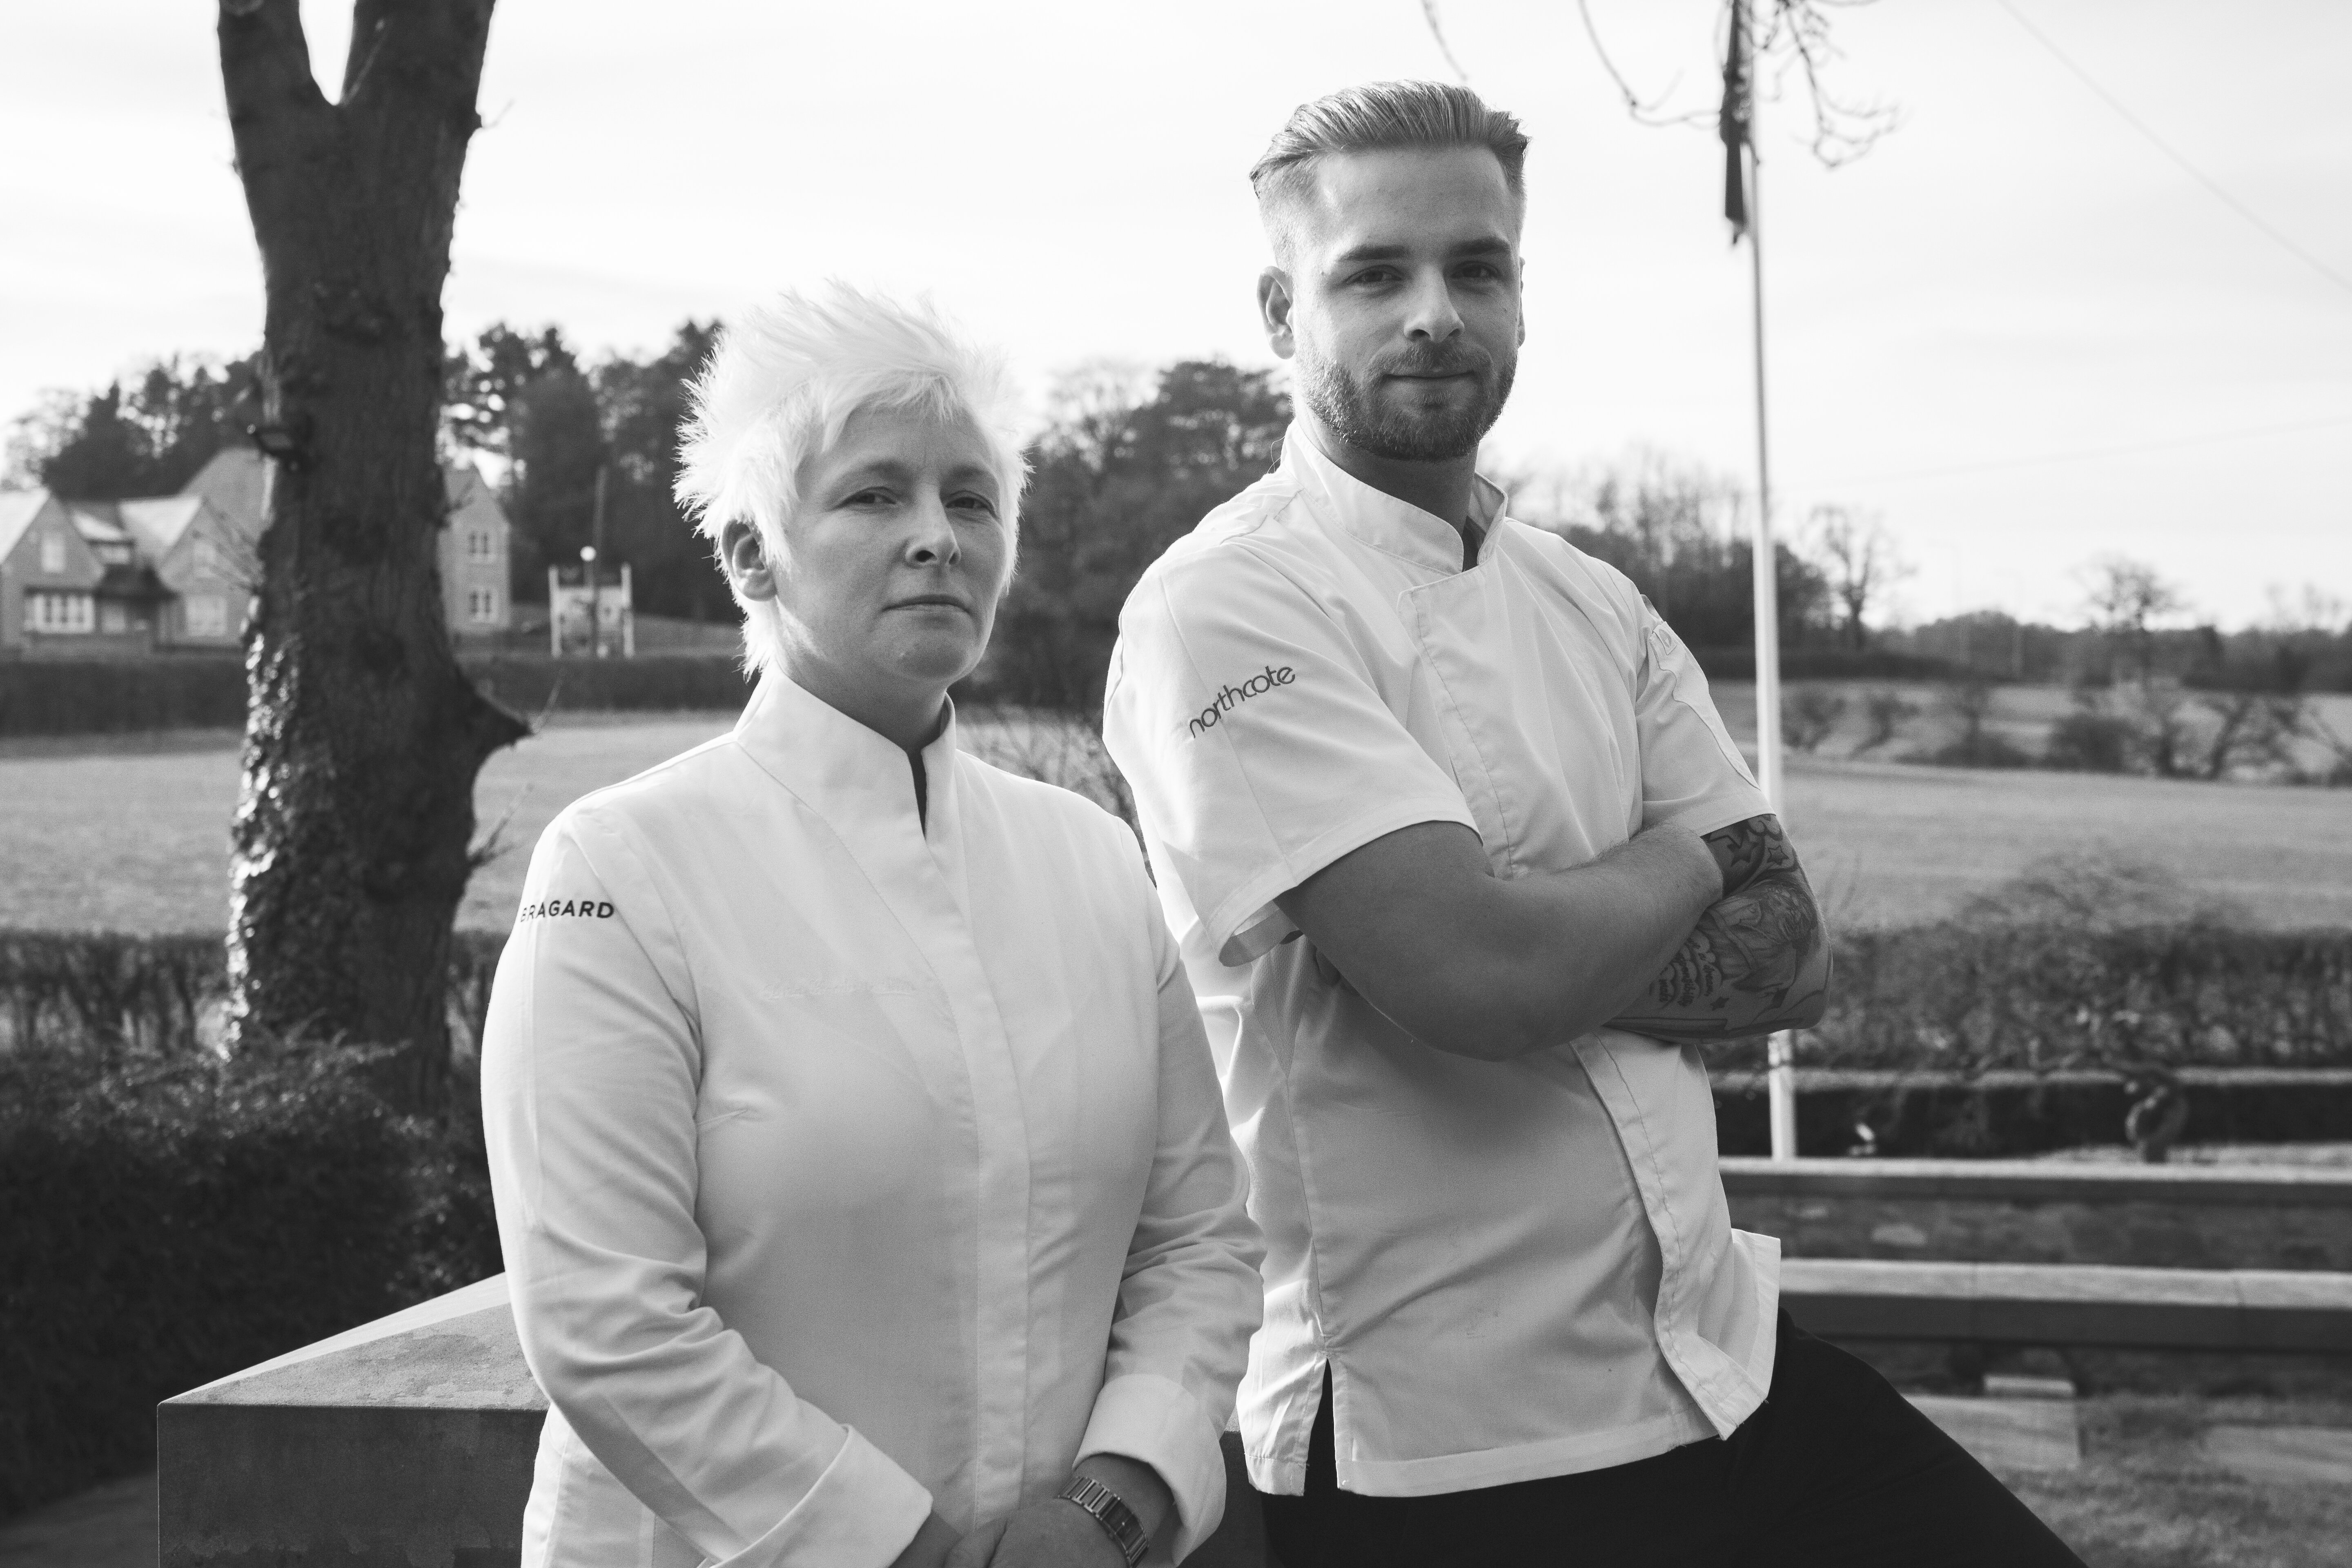 Liam Rogers joins Northcote as head chef